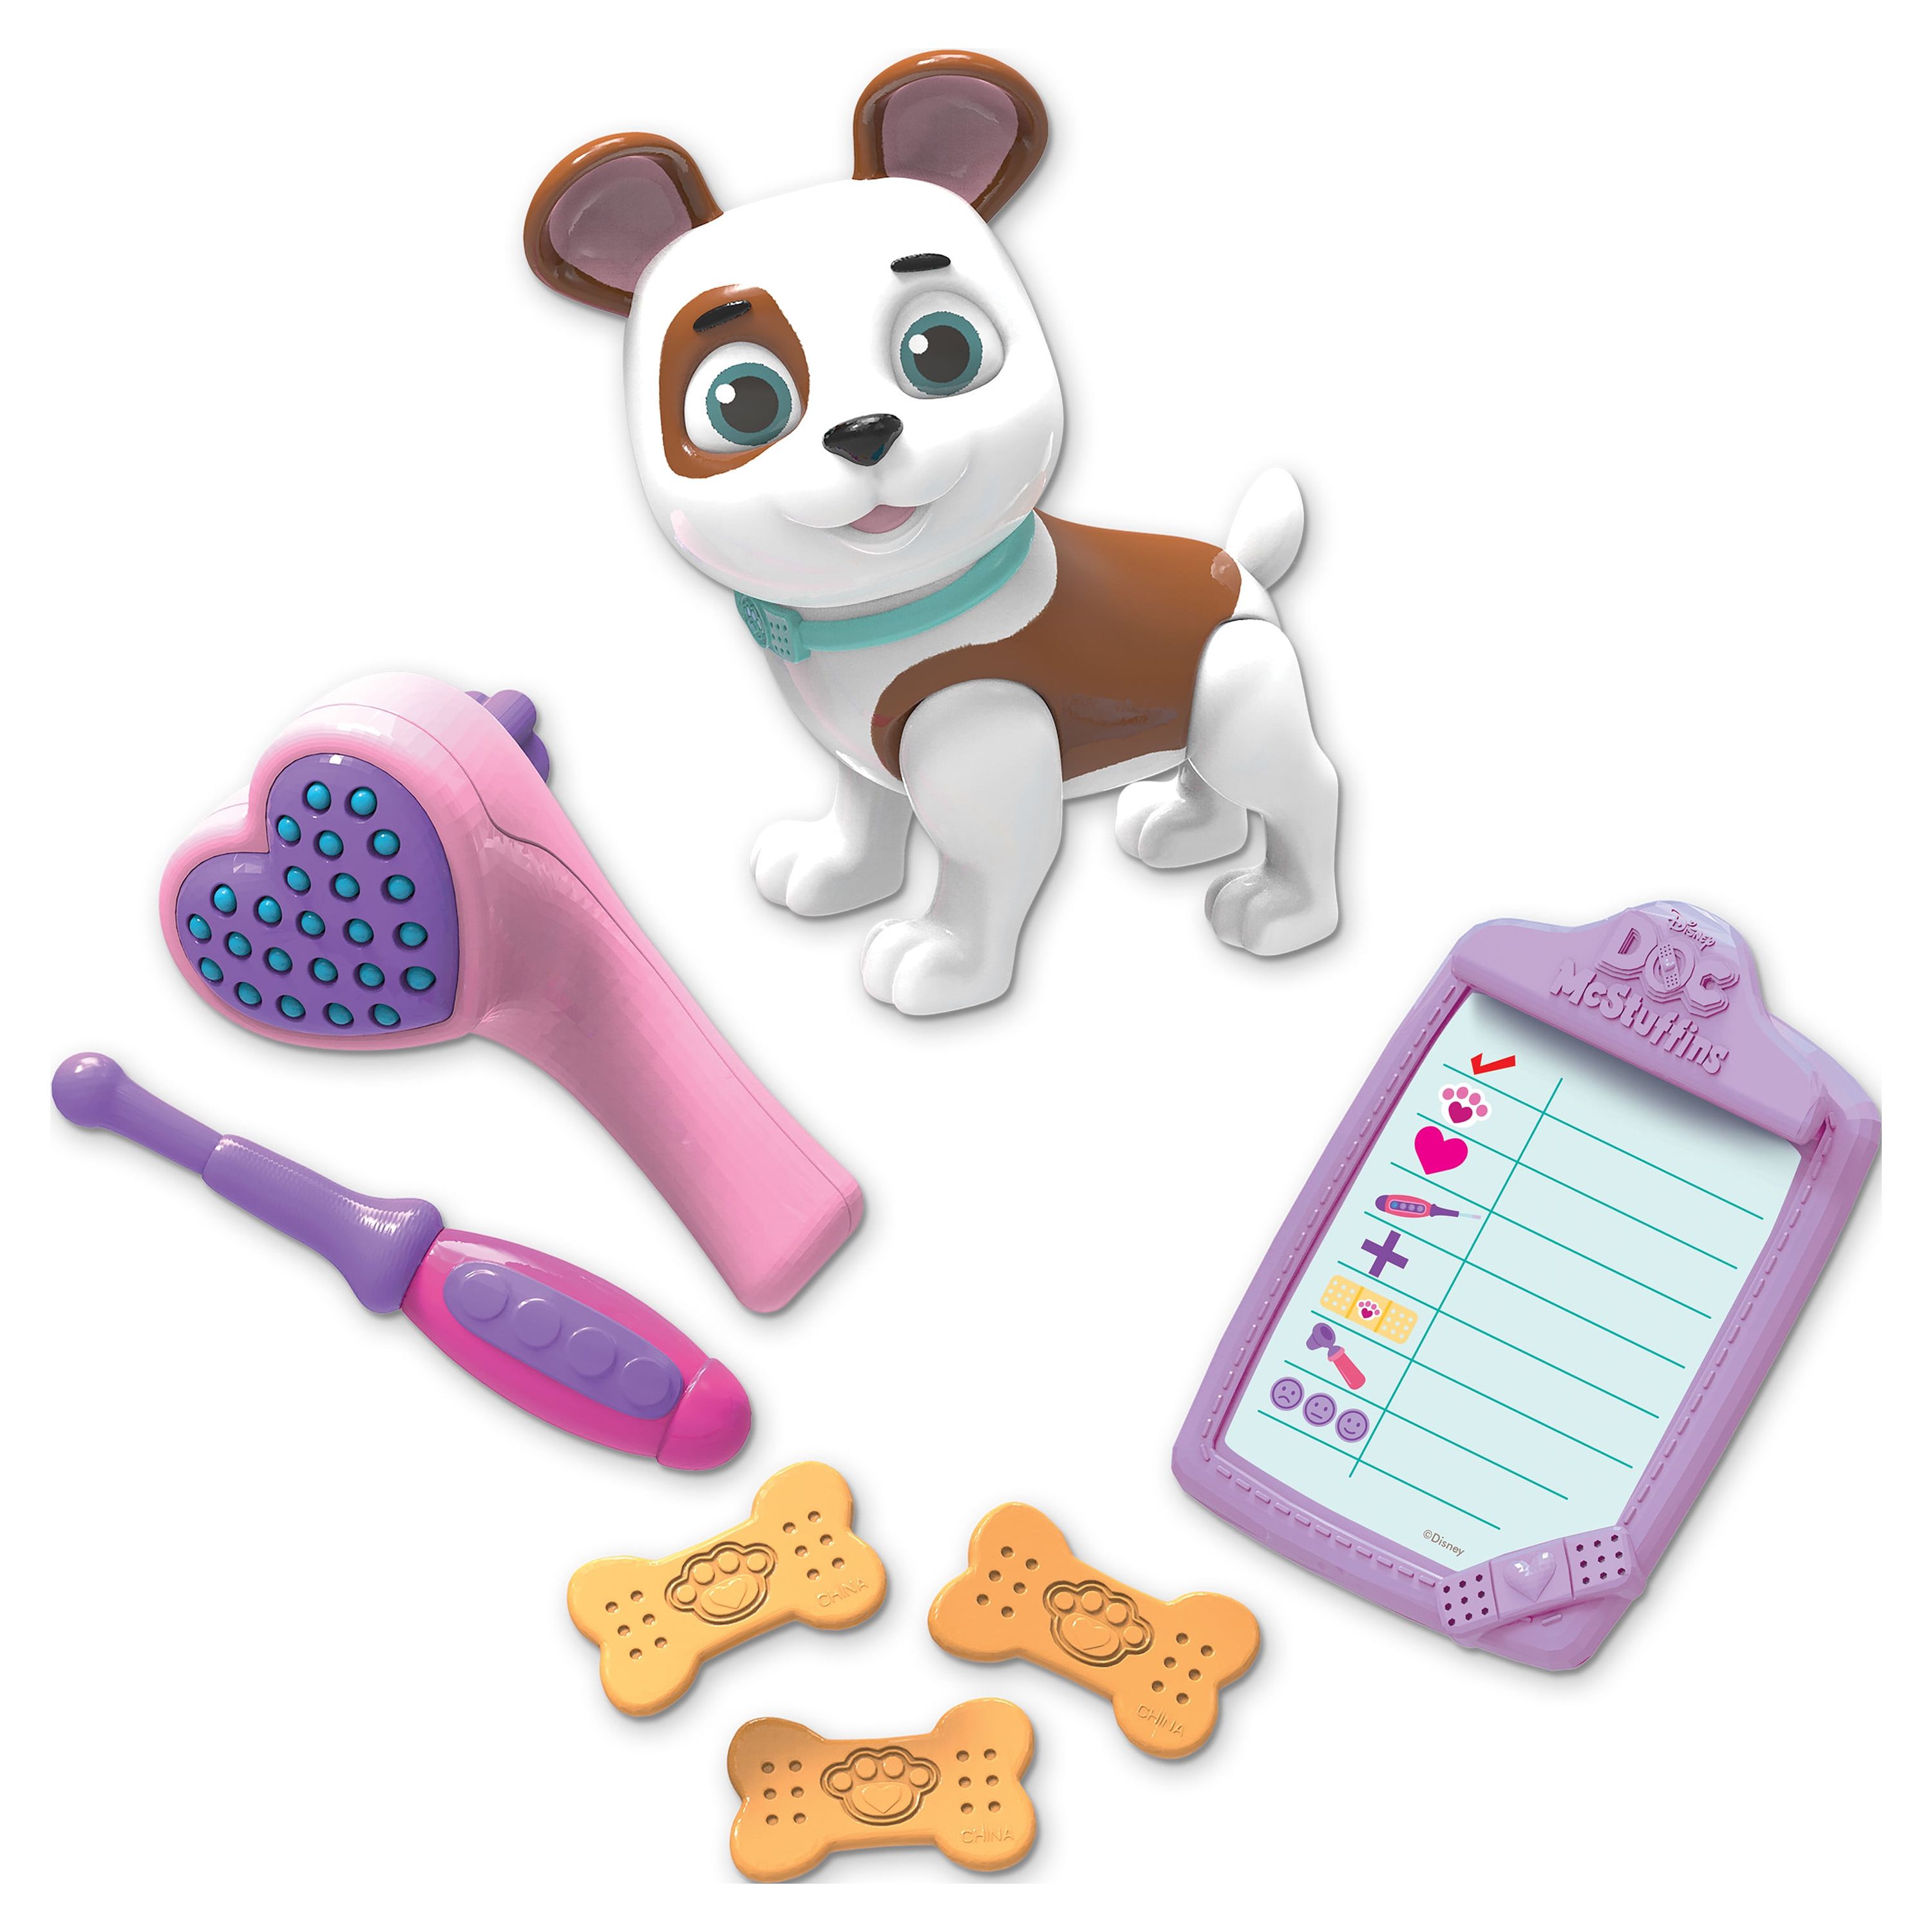 Doc McStuffins Pet Rescue Mobile, Officially Licensed Kids Toys for Ages 3 Up, Gifts and Presents - image 5 of 8